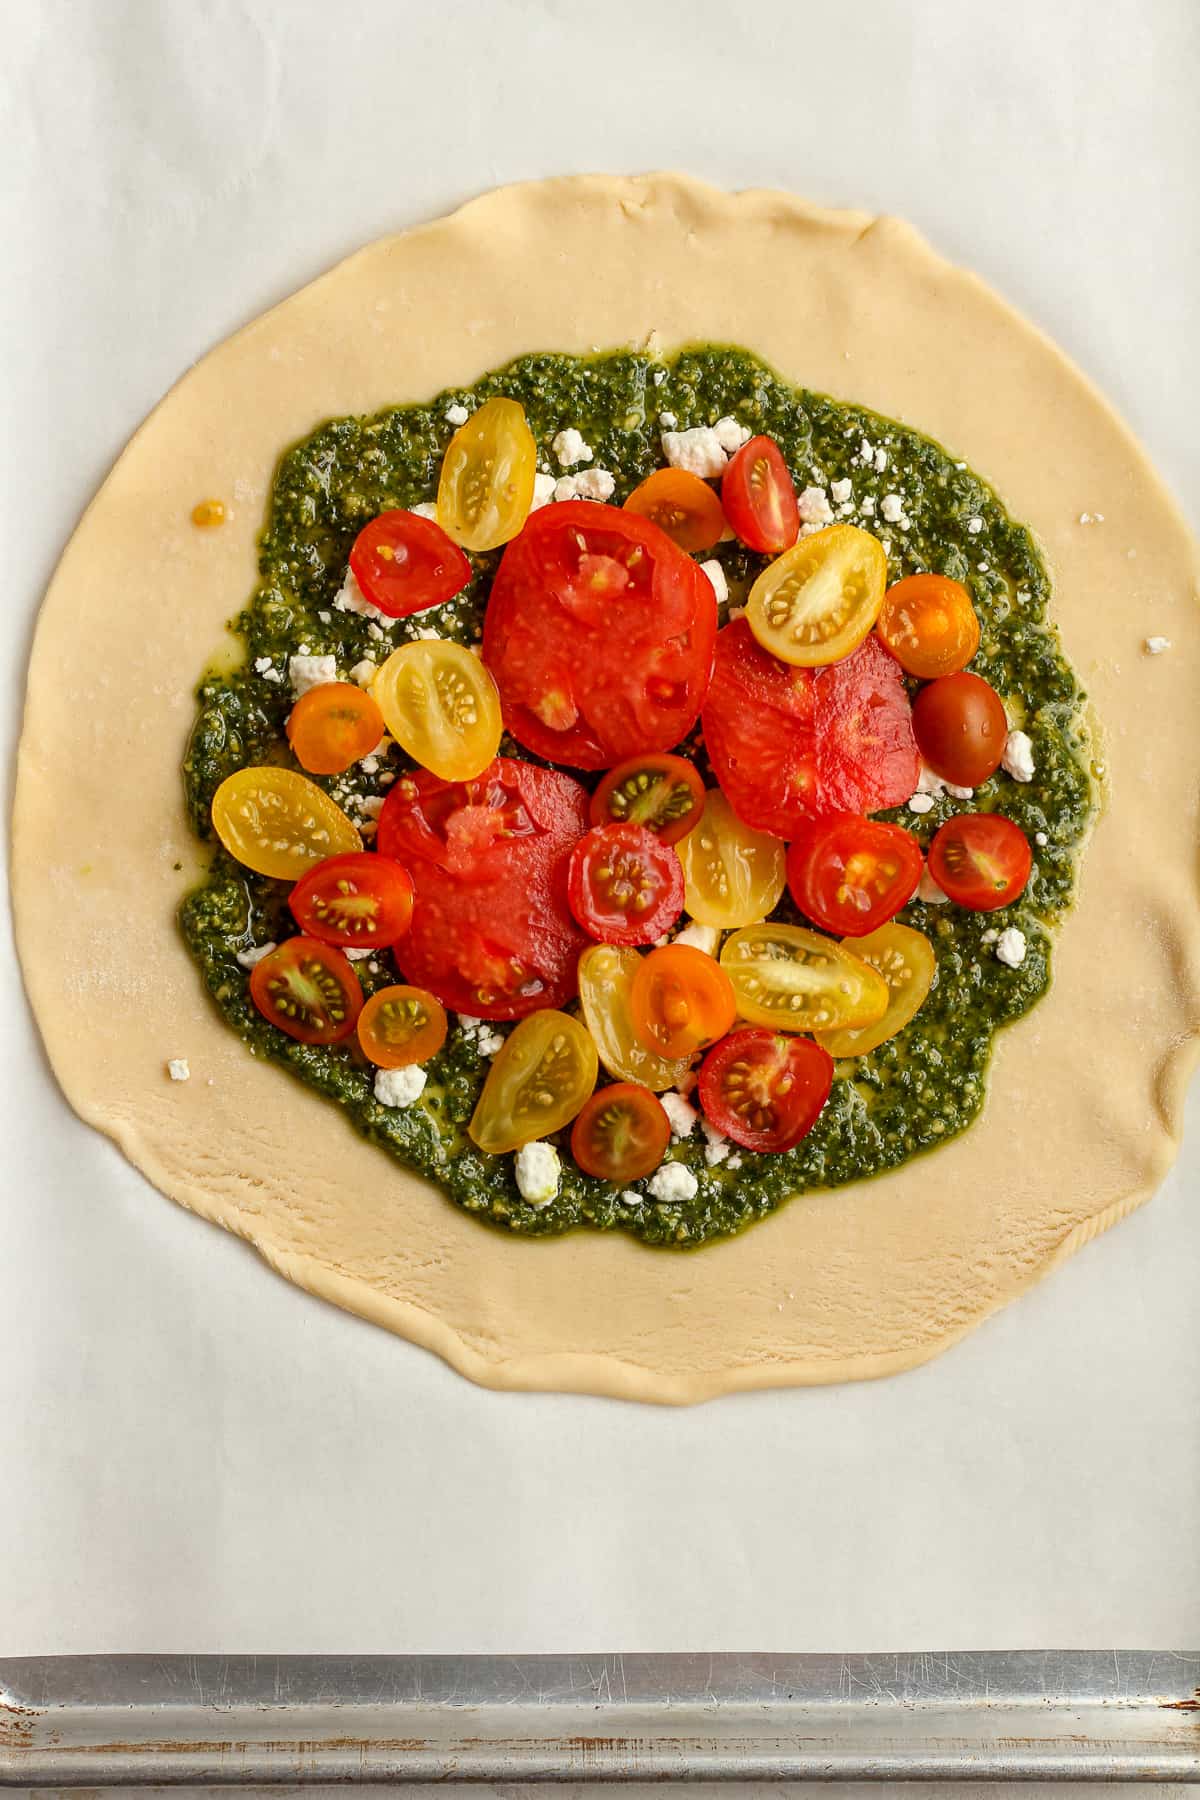 A pie crust with pesto sauce and tomatoes on top.